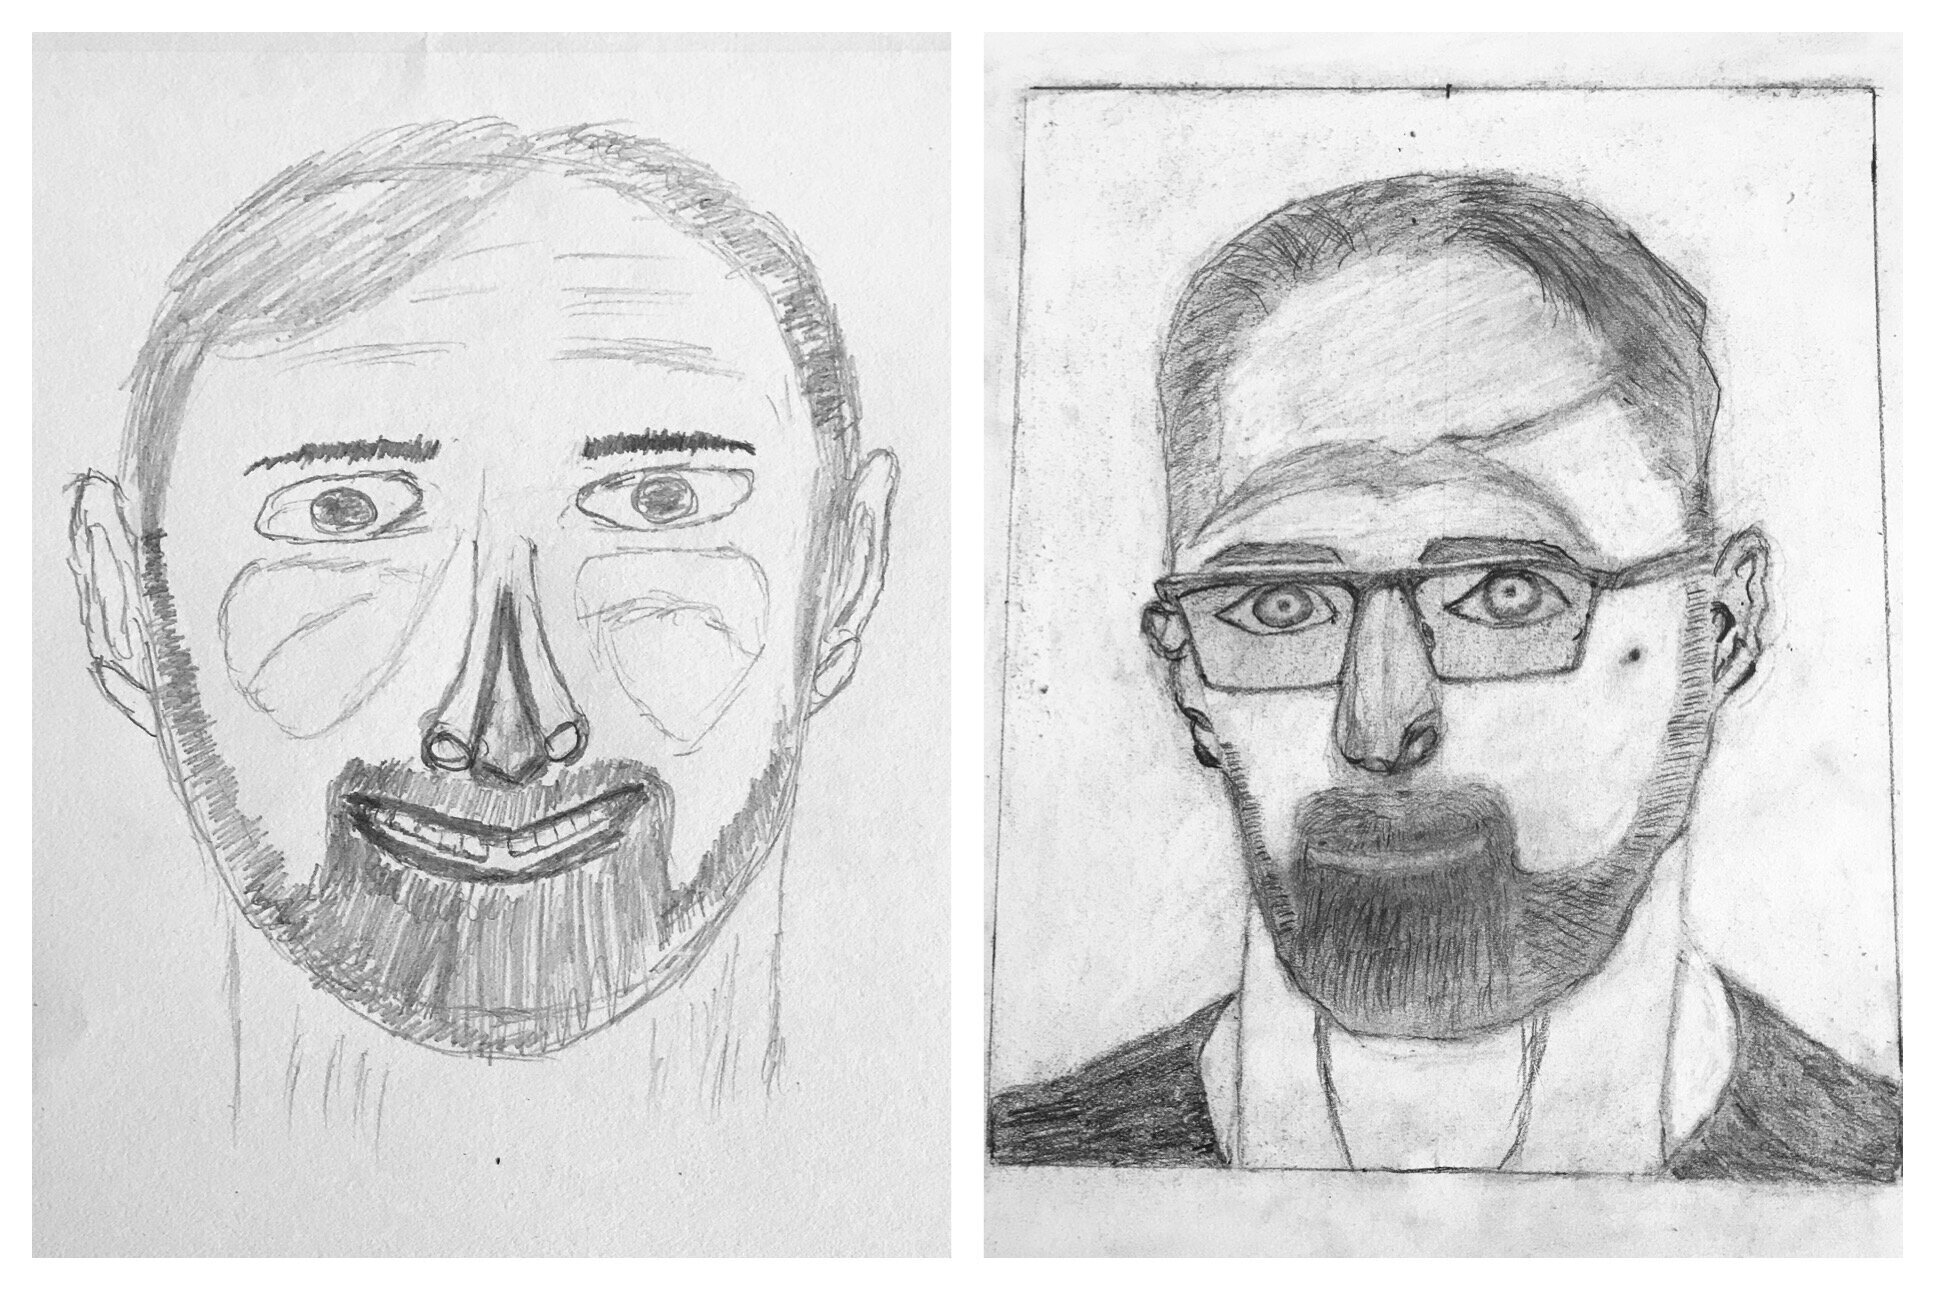 Martin's Before and After Self-Portraits.  Virtual Workshop October 2020